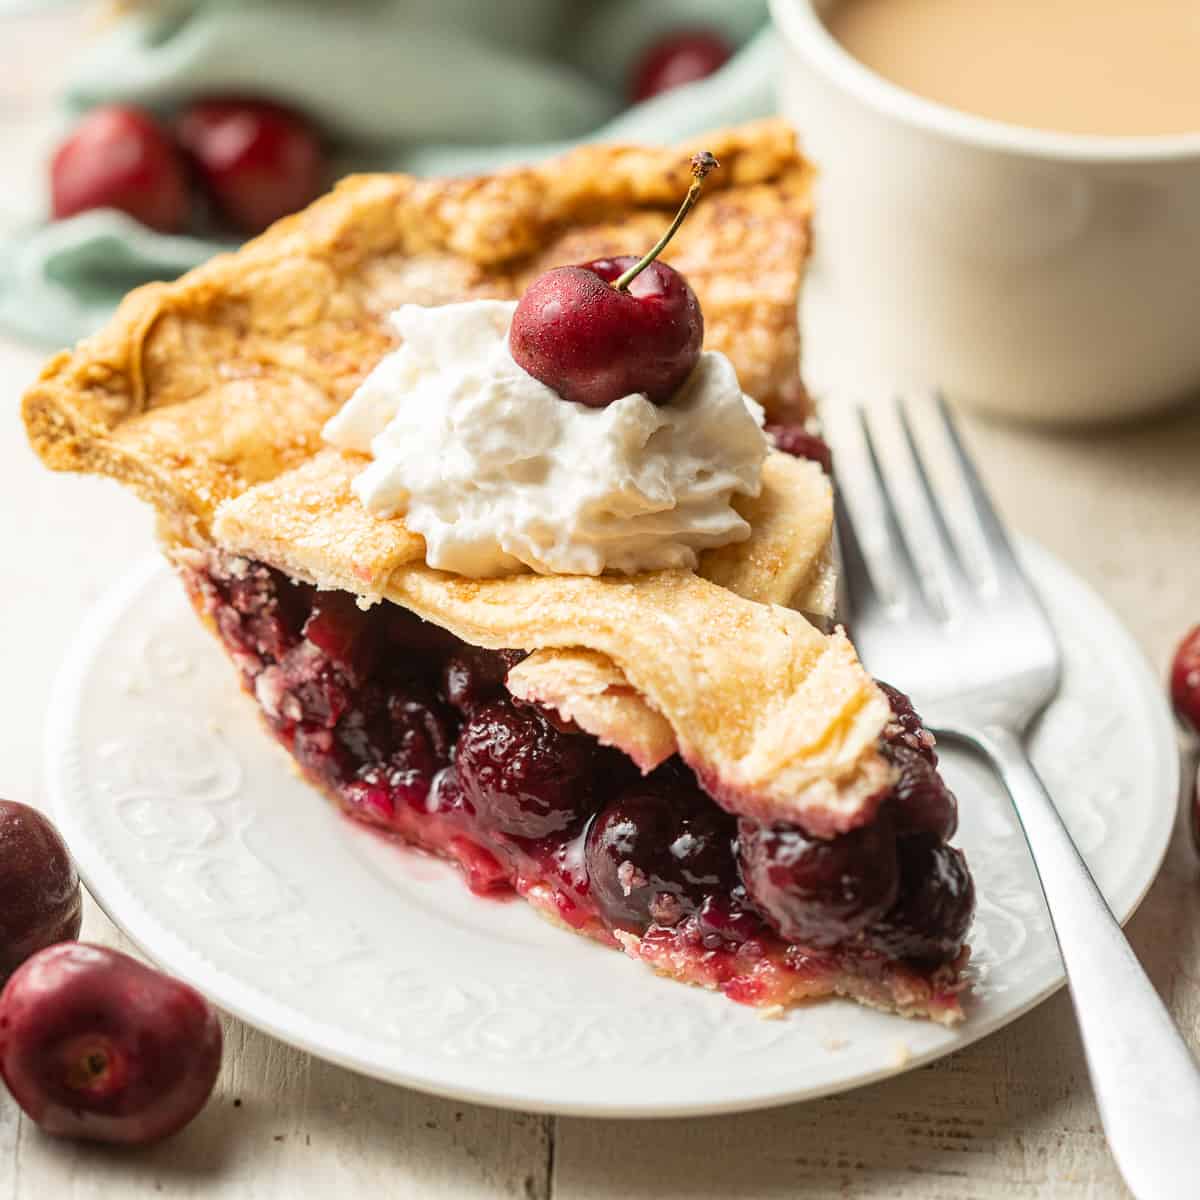 Slice of Vegan Cherry Pie on a plate with whipped cream and a cherry on top.